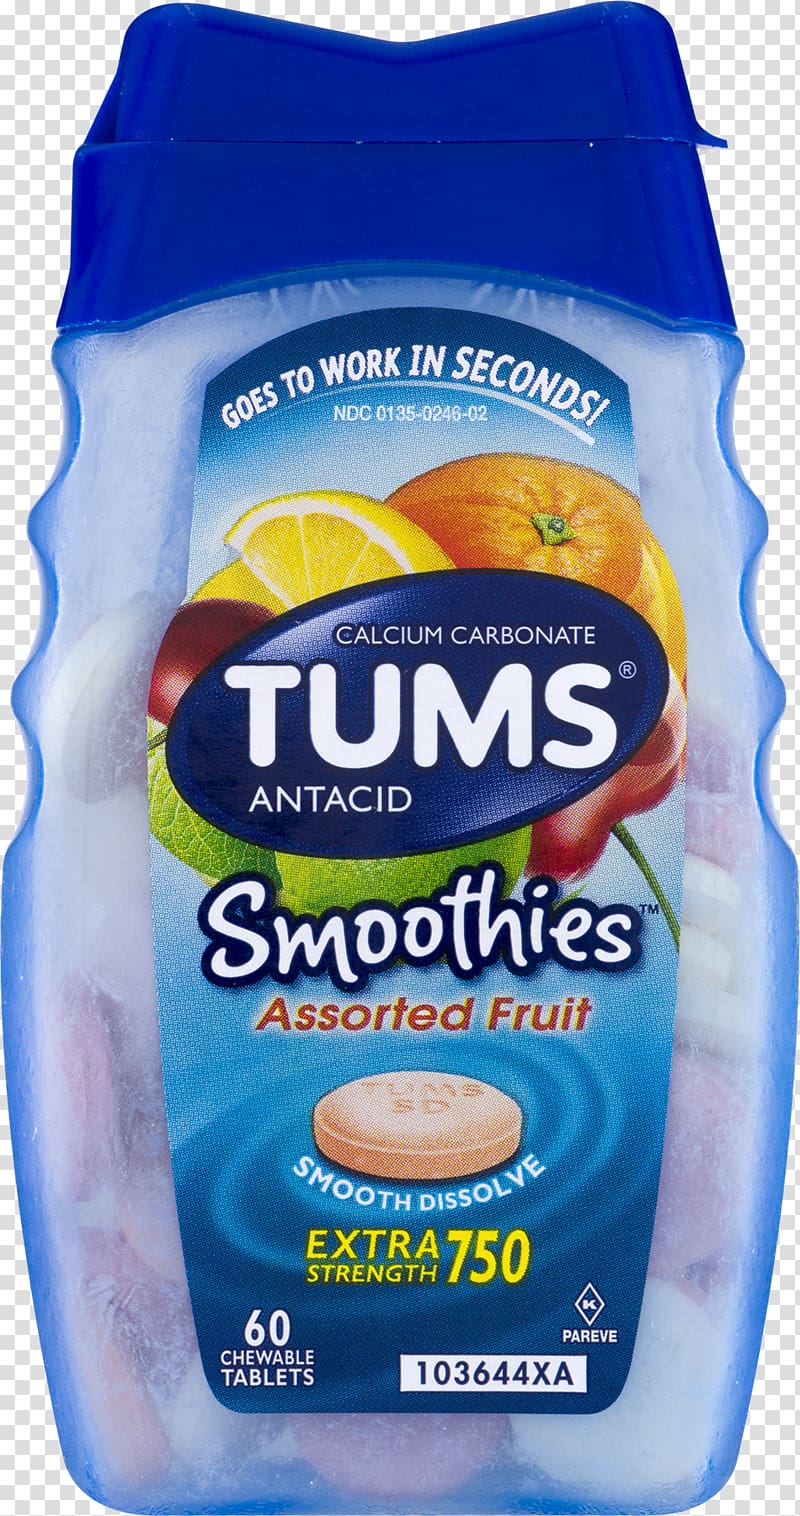 Smoothie Dietary supplement Tums Antacid Burning Chest Pain, others transparent background PNG clipart